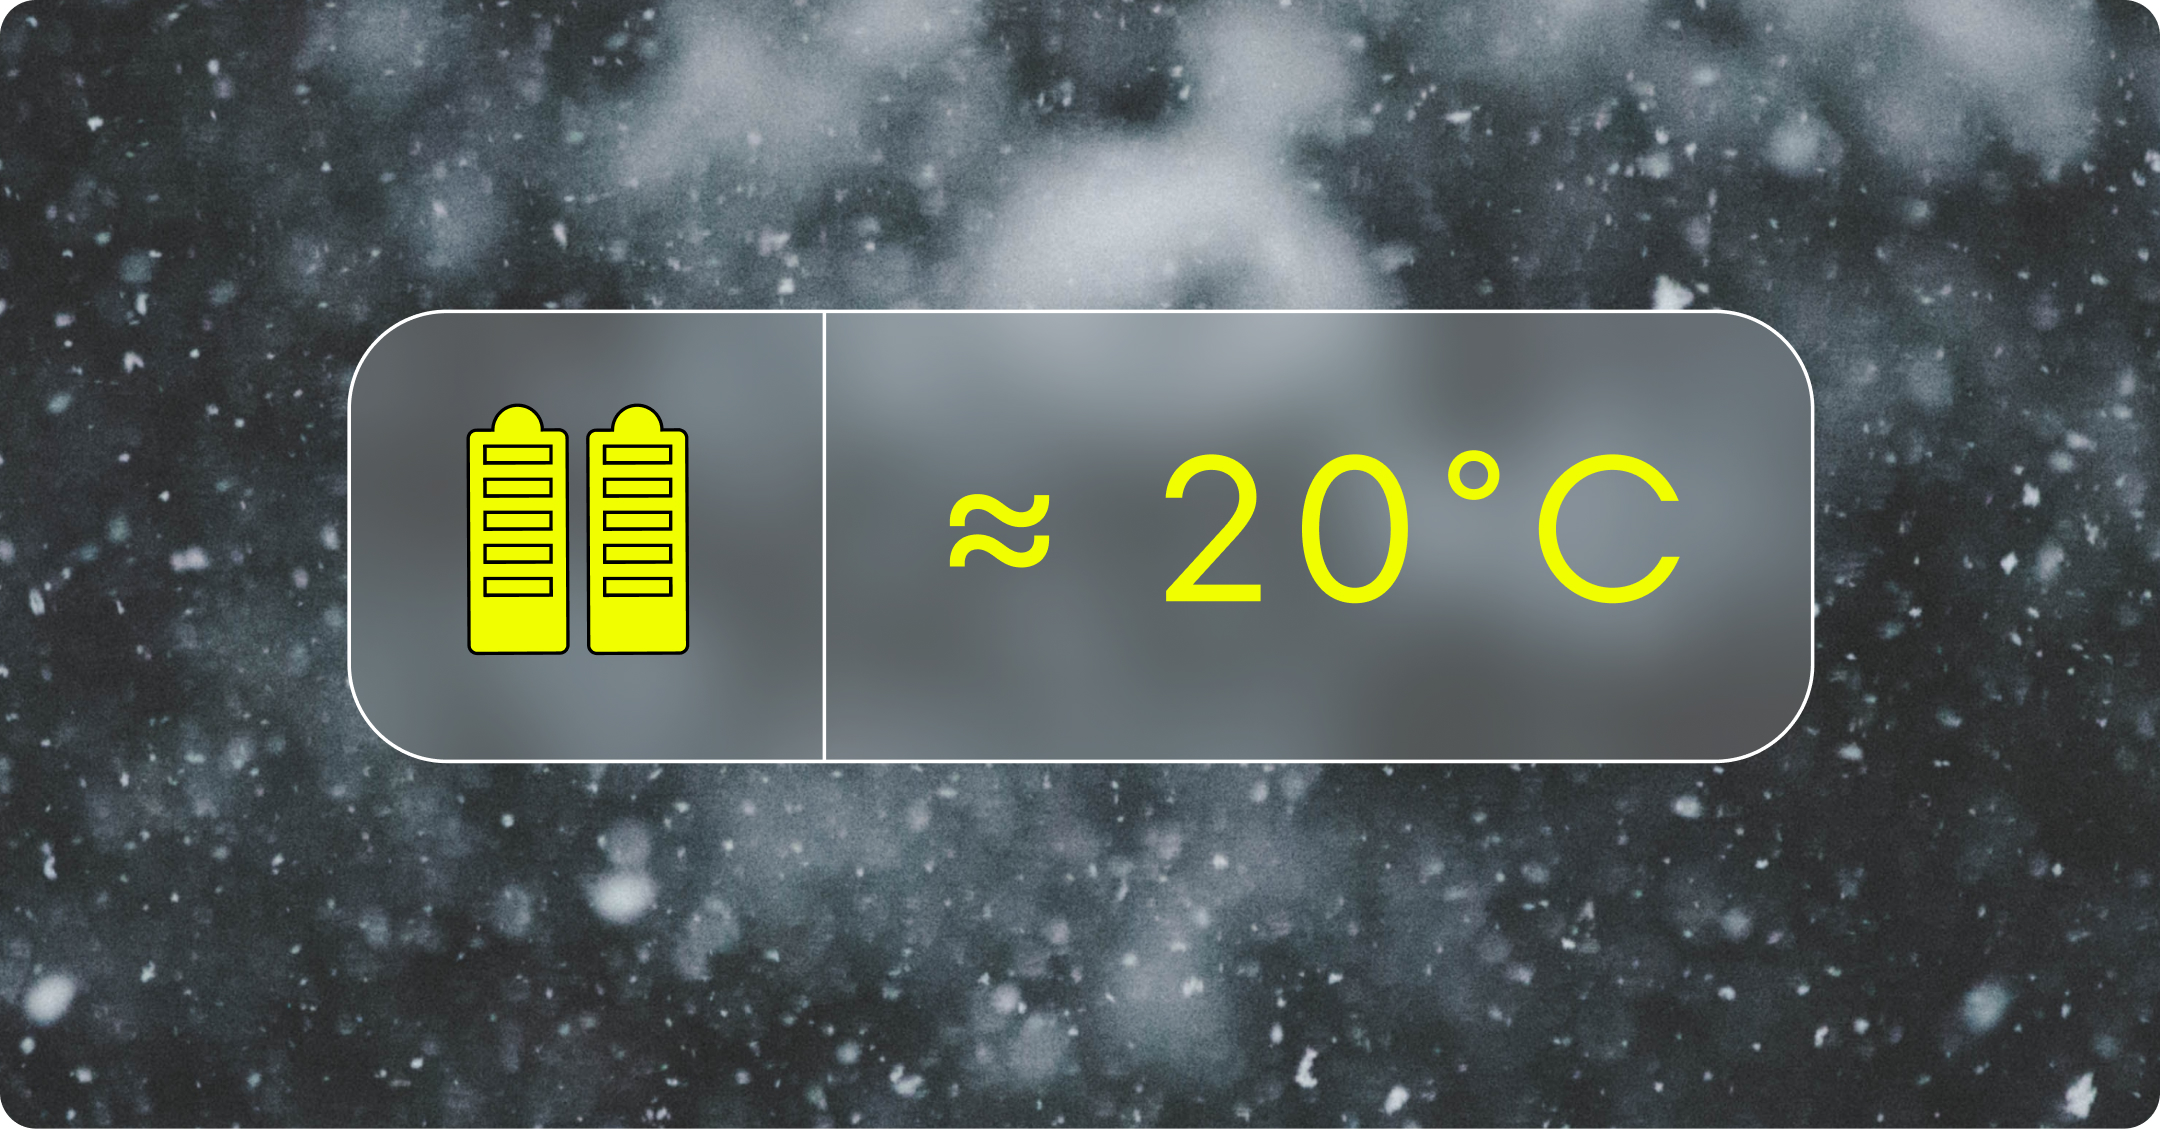 The optimum temperature for an EV battery is 20°C. Below that, the electrochemical reactions within the battery will slow down